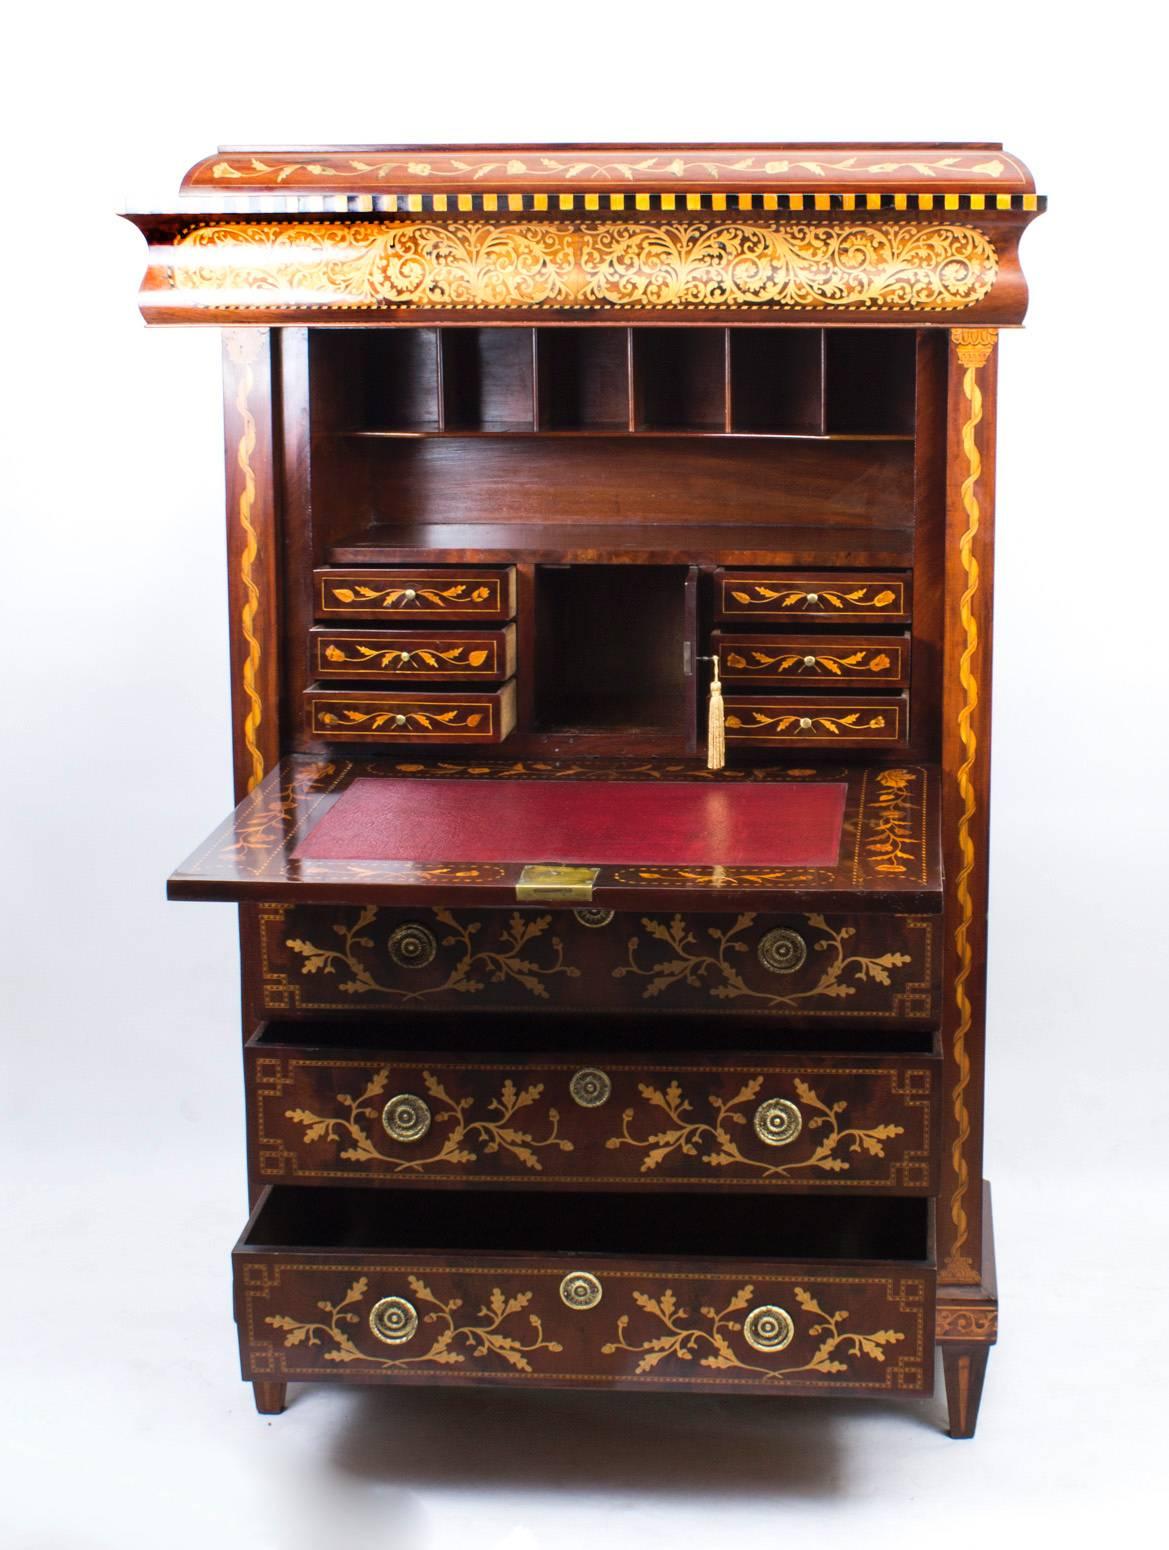 This is a fabulous antique Dutch Secretaire a Abbatant, circa 1800 in date.

It is made of fabulous flame mahogany with an incredibly complex satinwood floral marquetry decoration with ribbons, garlands, birds and seaweed marquetry.

This piece